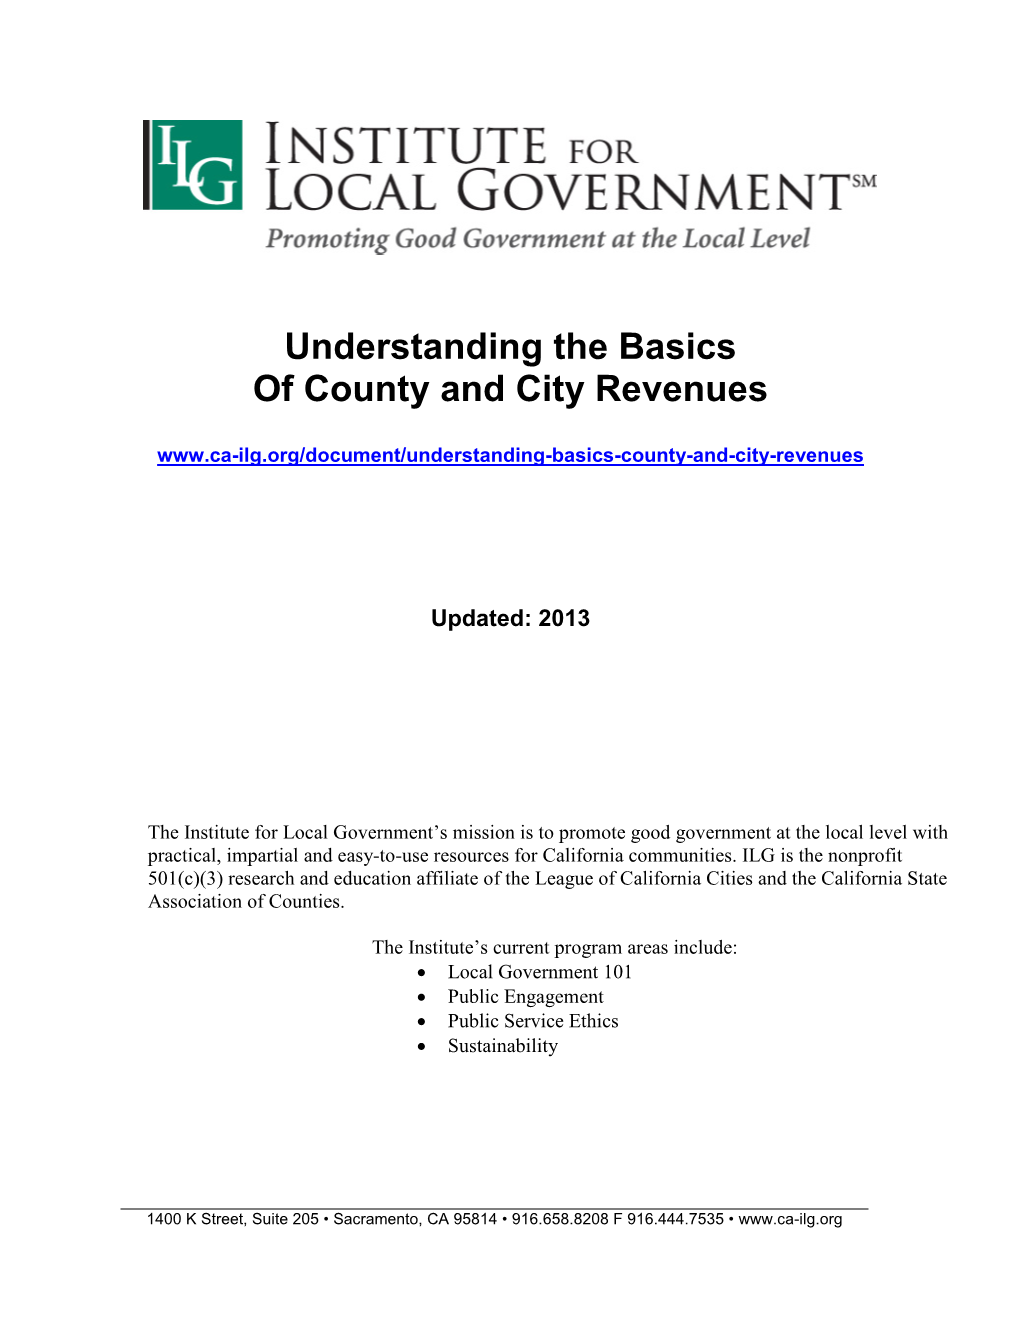 Understanding the Basics of County and City Revenues